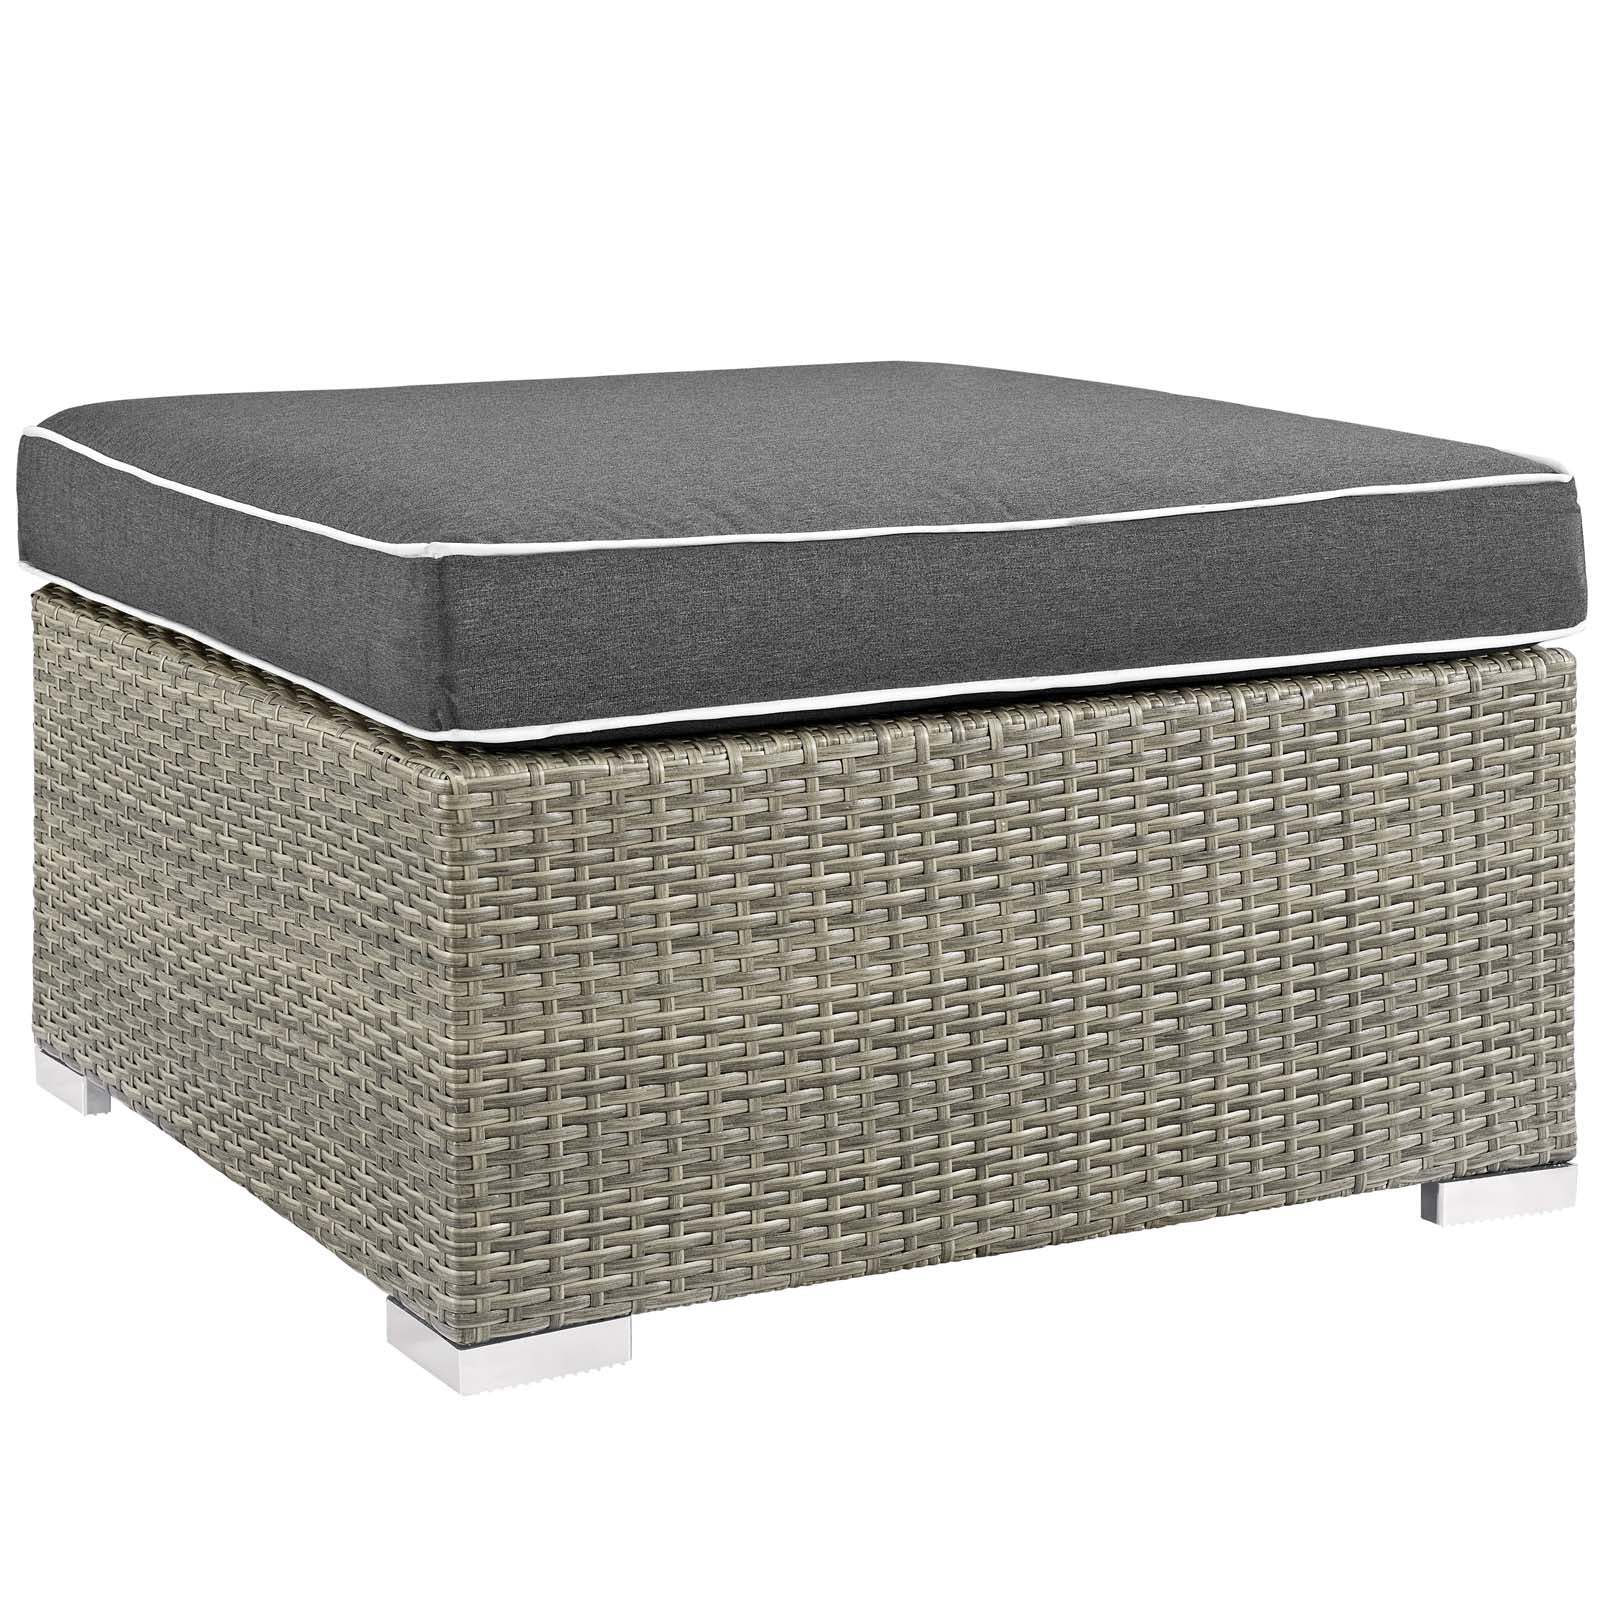 Modway Outdoor Stools & Benches - Repose Outdoor Patio Upholstered Fabric Ottoman Light Gray Charcoal